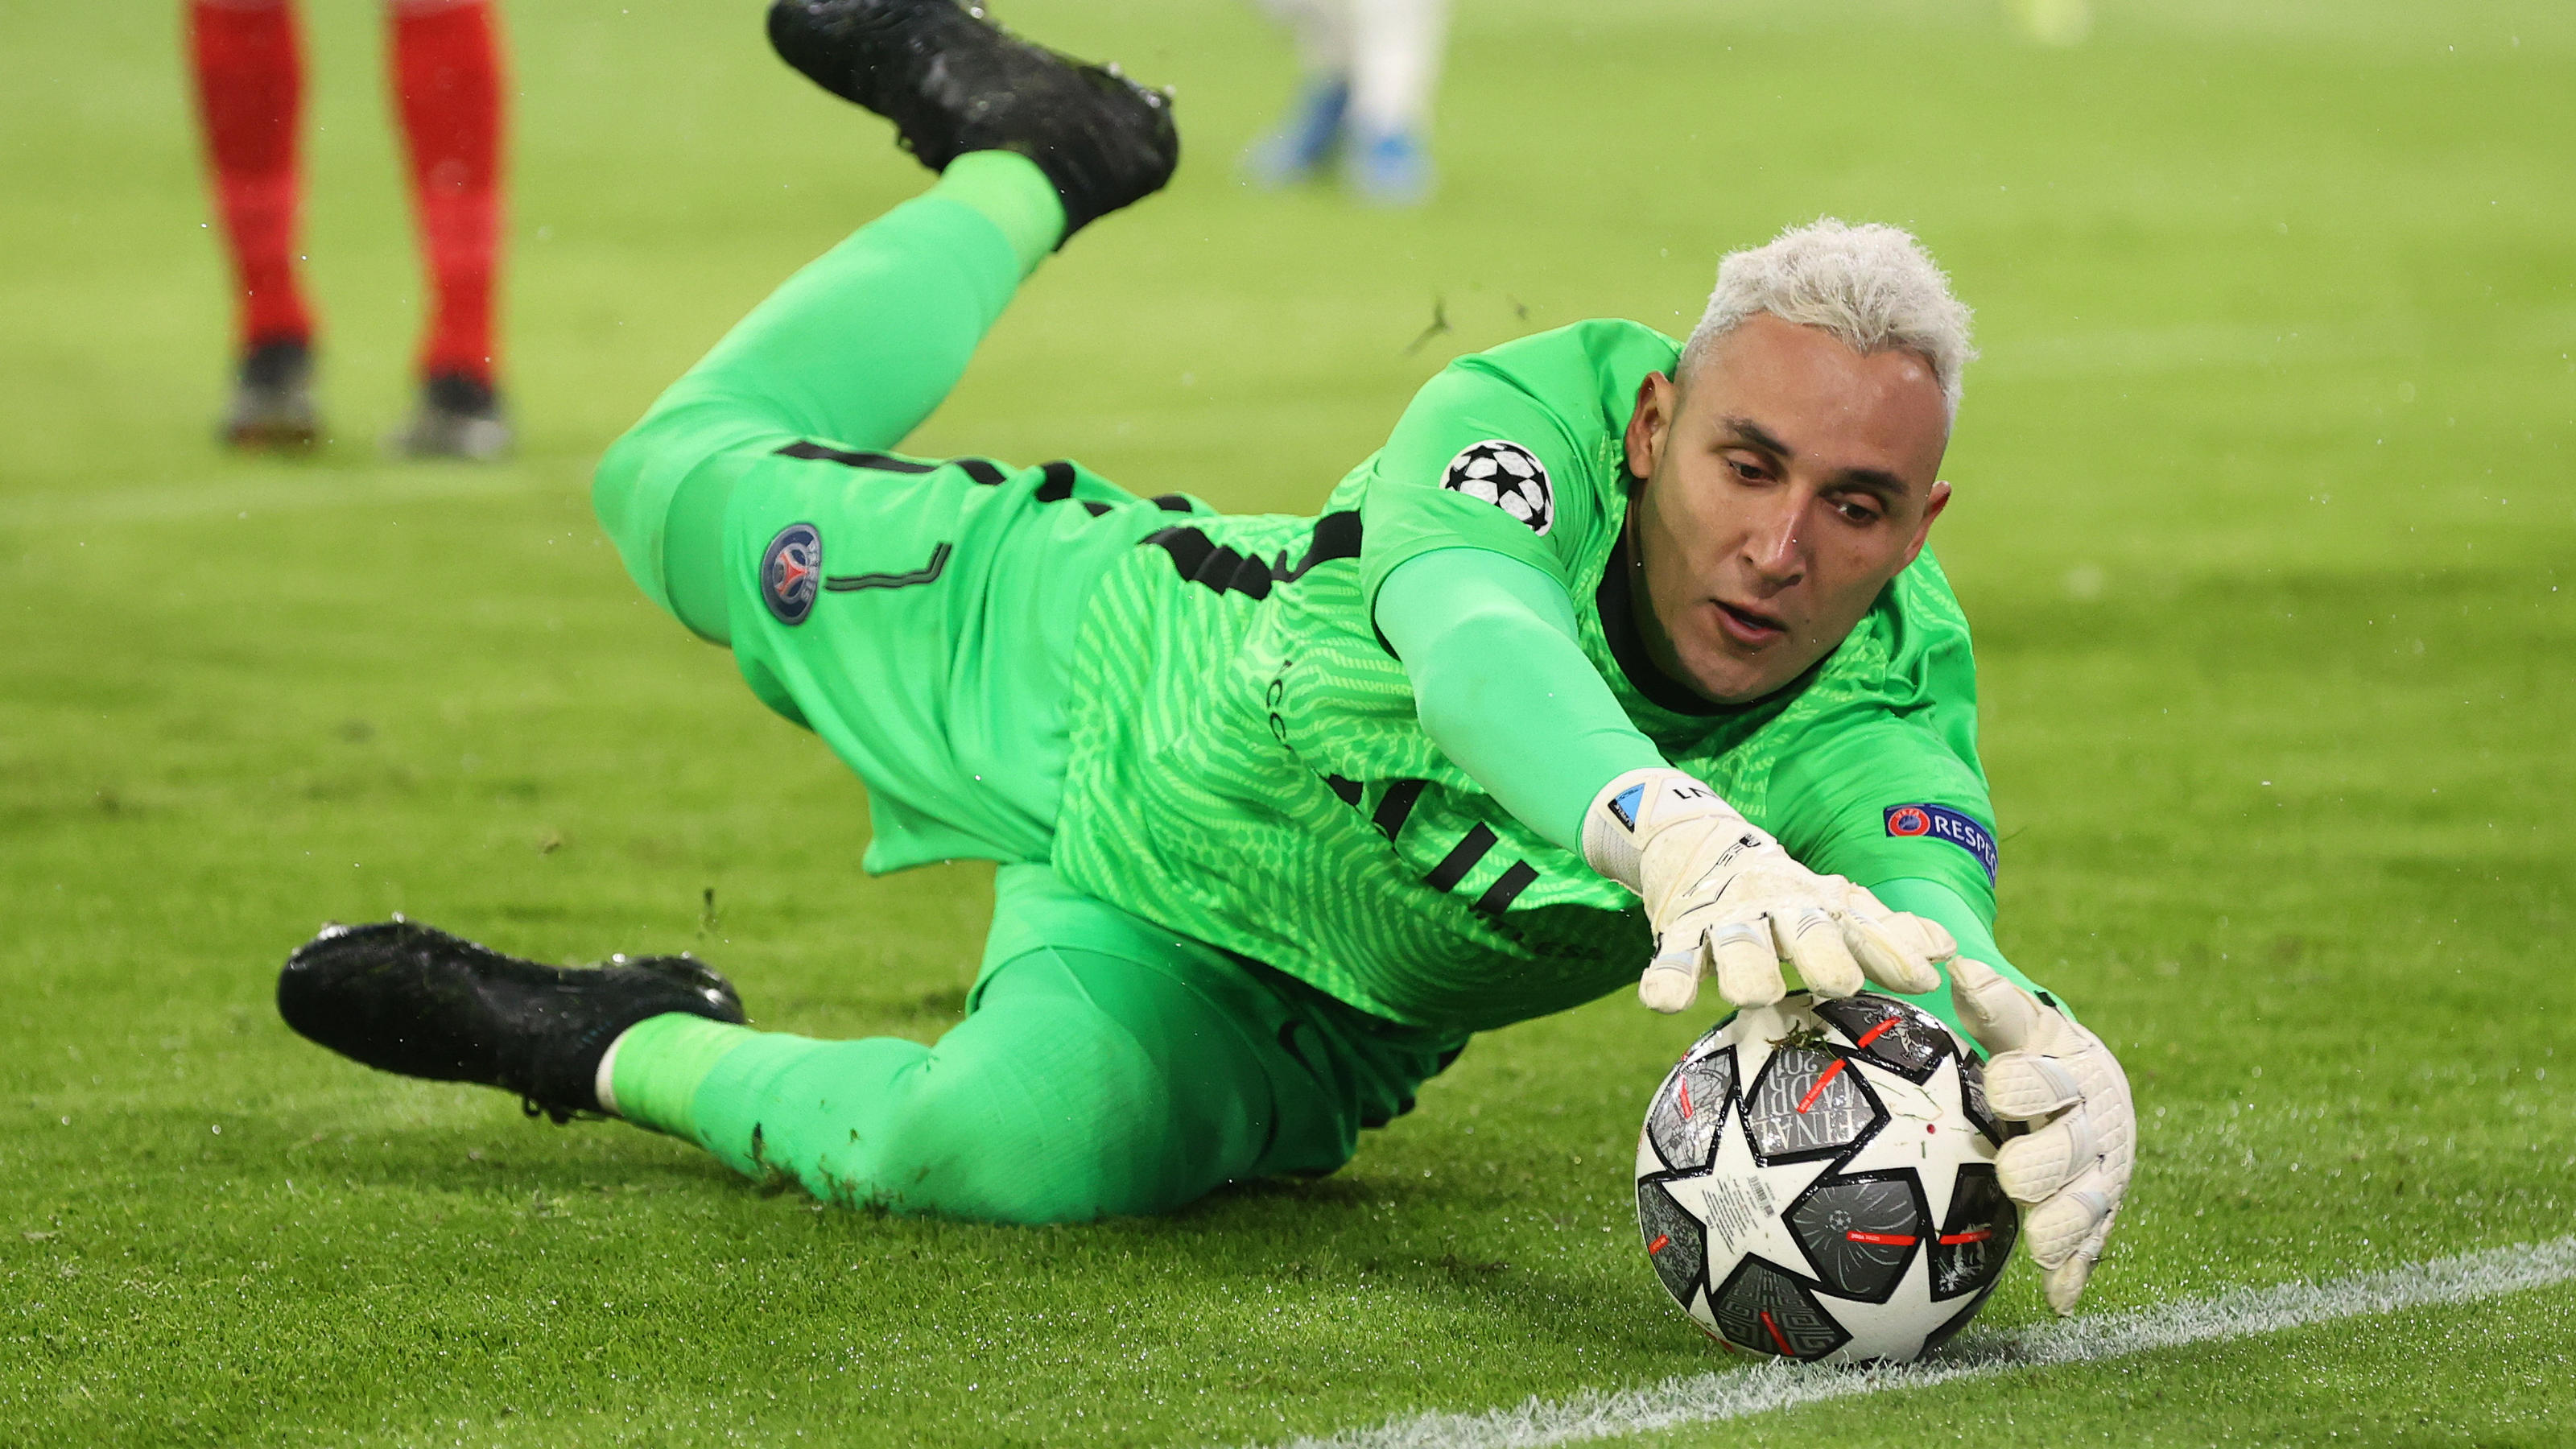 MUNICH, GERMANY - APRIL 07: Keylor Navas of Paris Saint-Germain stretches to keep the ball in play during the UEFA Champions League Quarter Final match between FC Bayern Munich and Paris Saint-Germain at Allianz Arena on April 07, 2021 in Munich, Ger